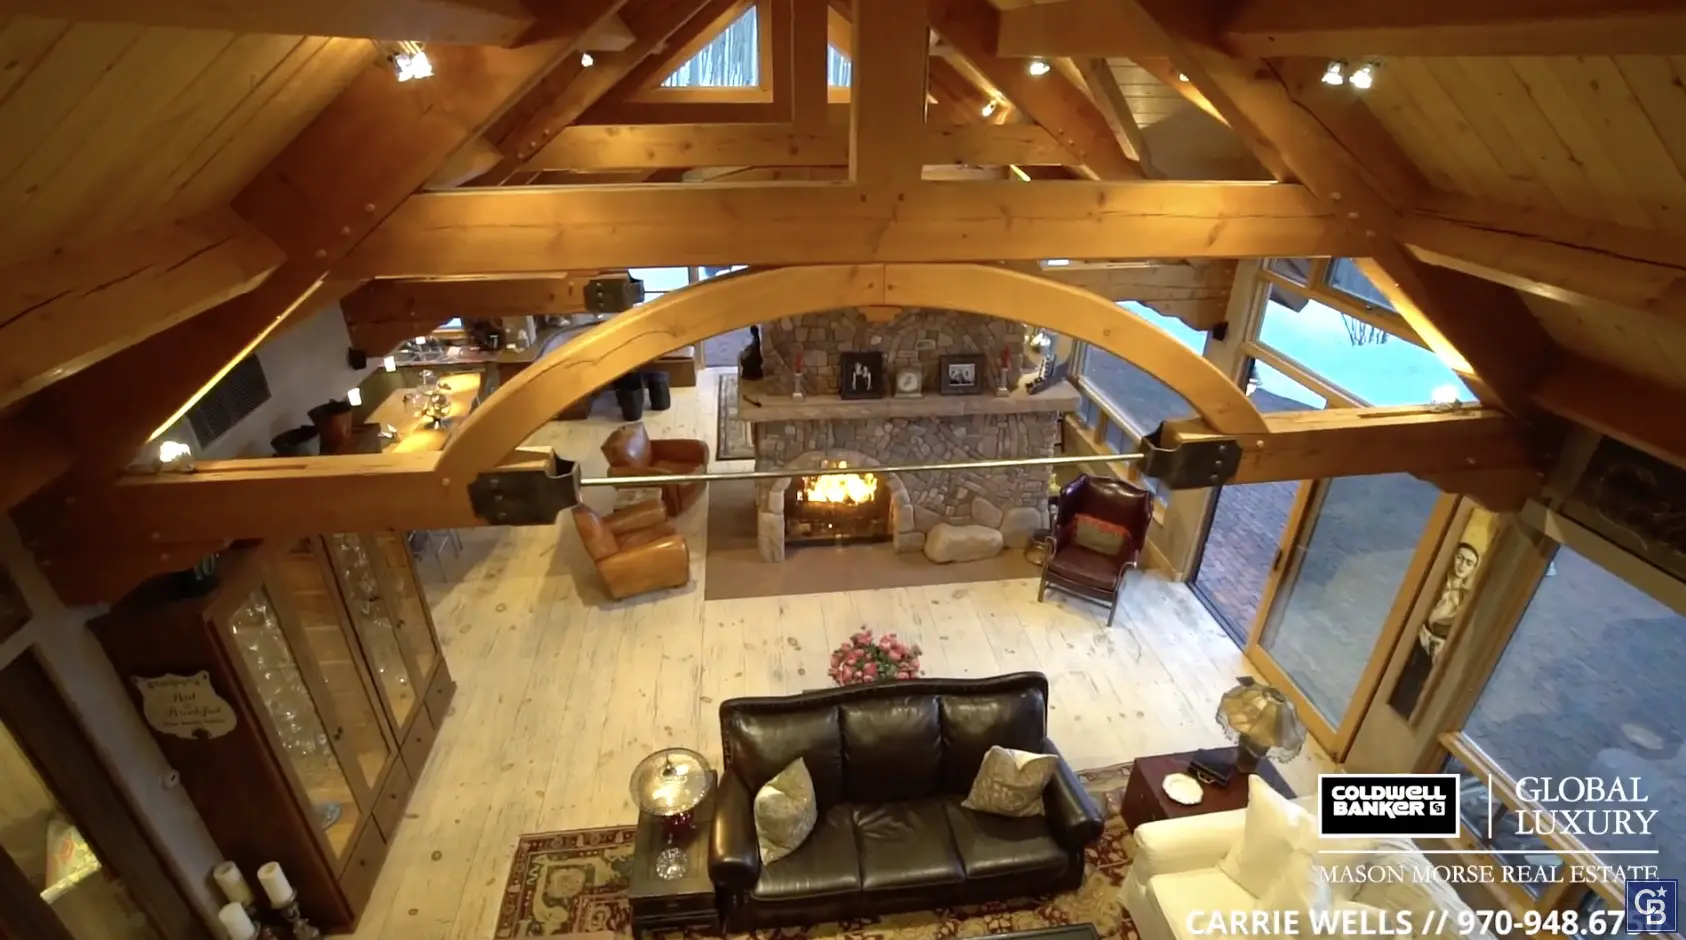 Melanie Griffith's Aspen mansion | Source: youtube.com/@coldwellbanker